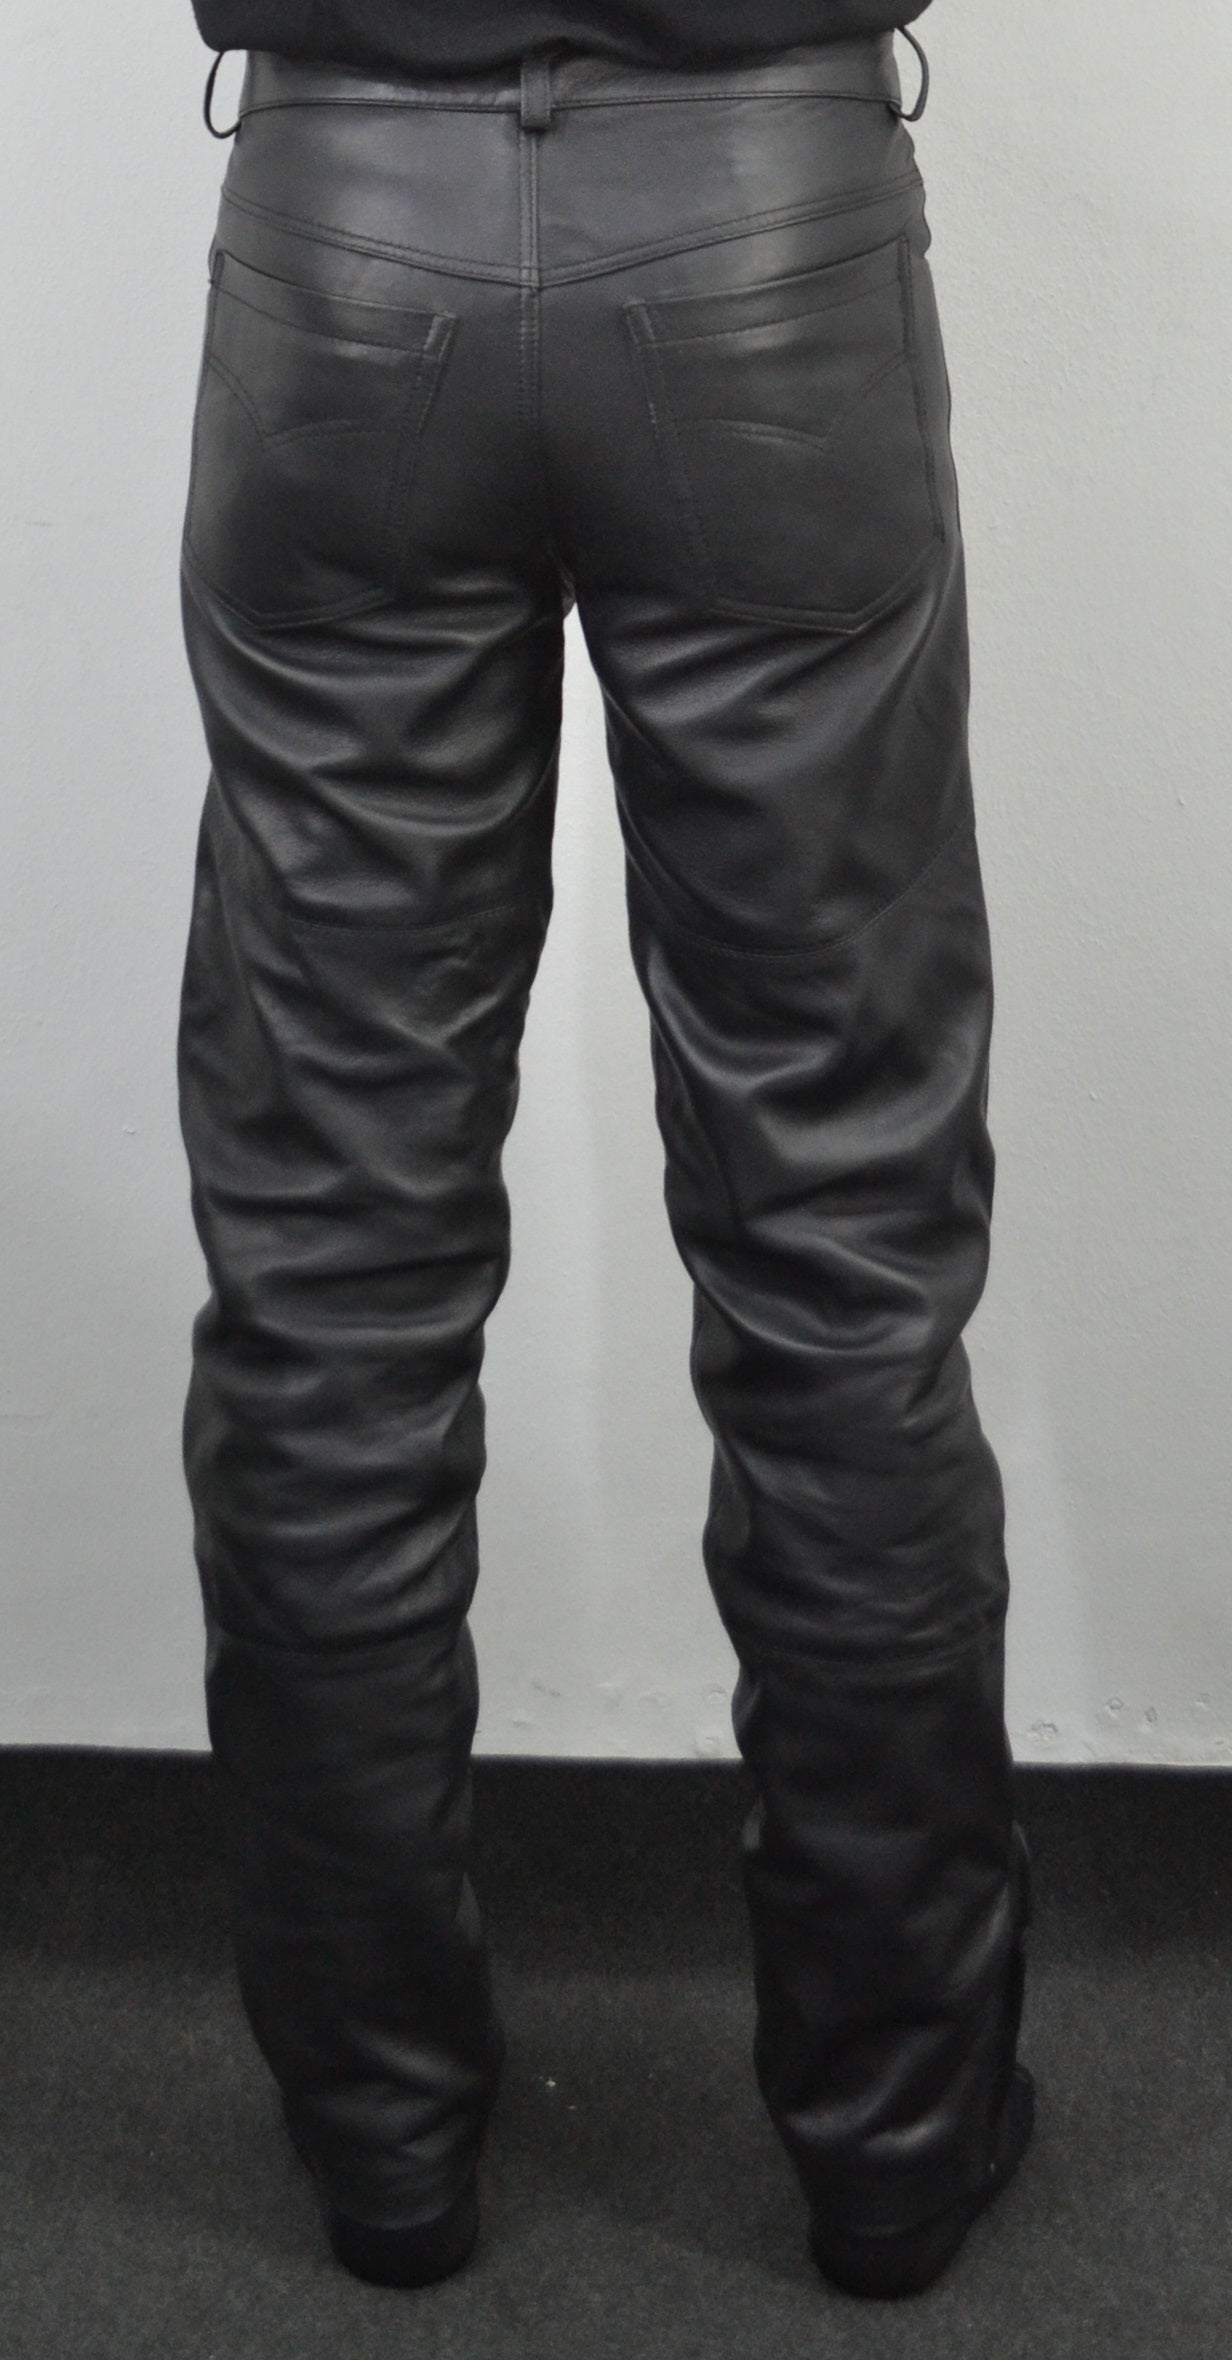 SBL South Beach Leather Terminator 2 Arnold Black Costume Straight Leather Pant Natural Waist at Belly 42-43